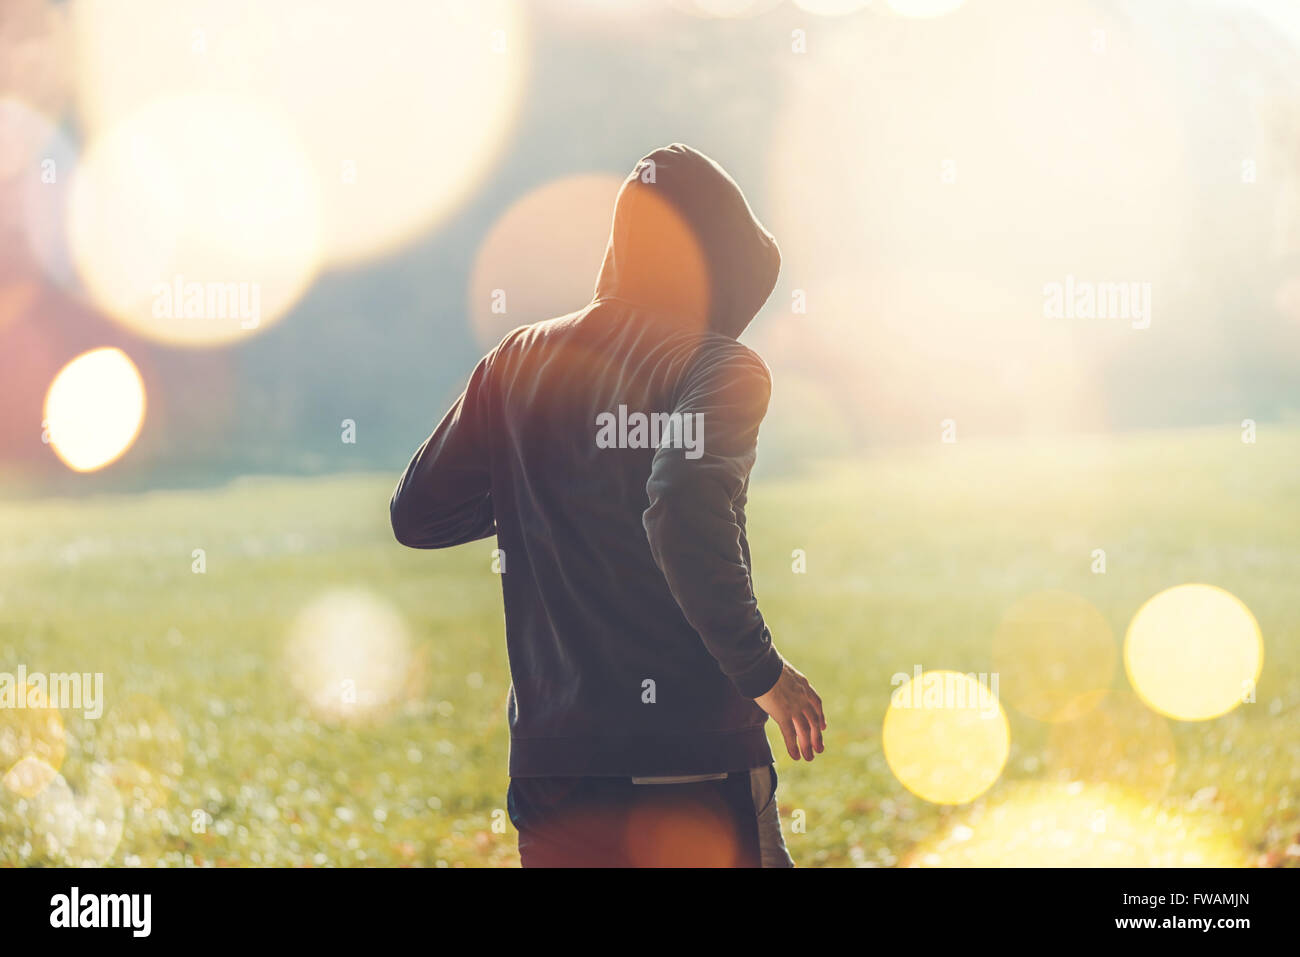 Unrecognizable hooded man jogging outdoors, healthy lifestyle activity in the park in early autumn morning, retro toned image Stock Photo